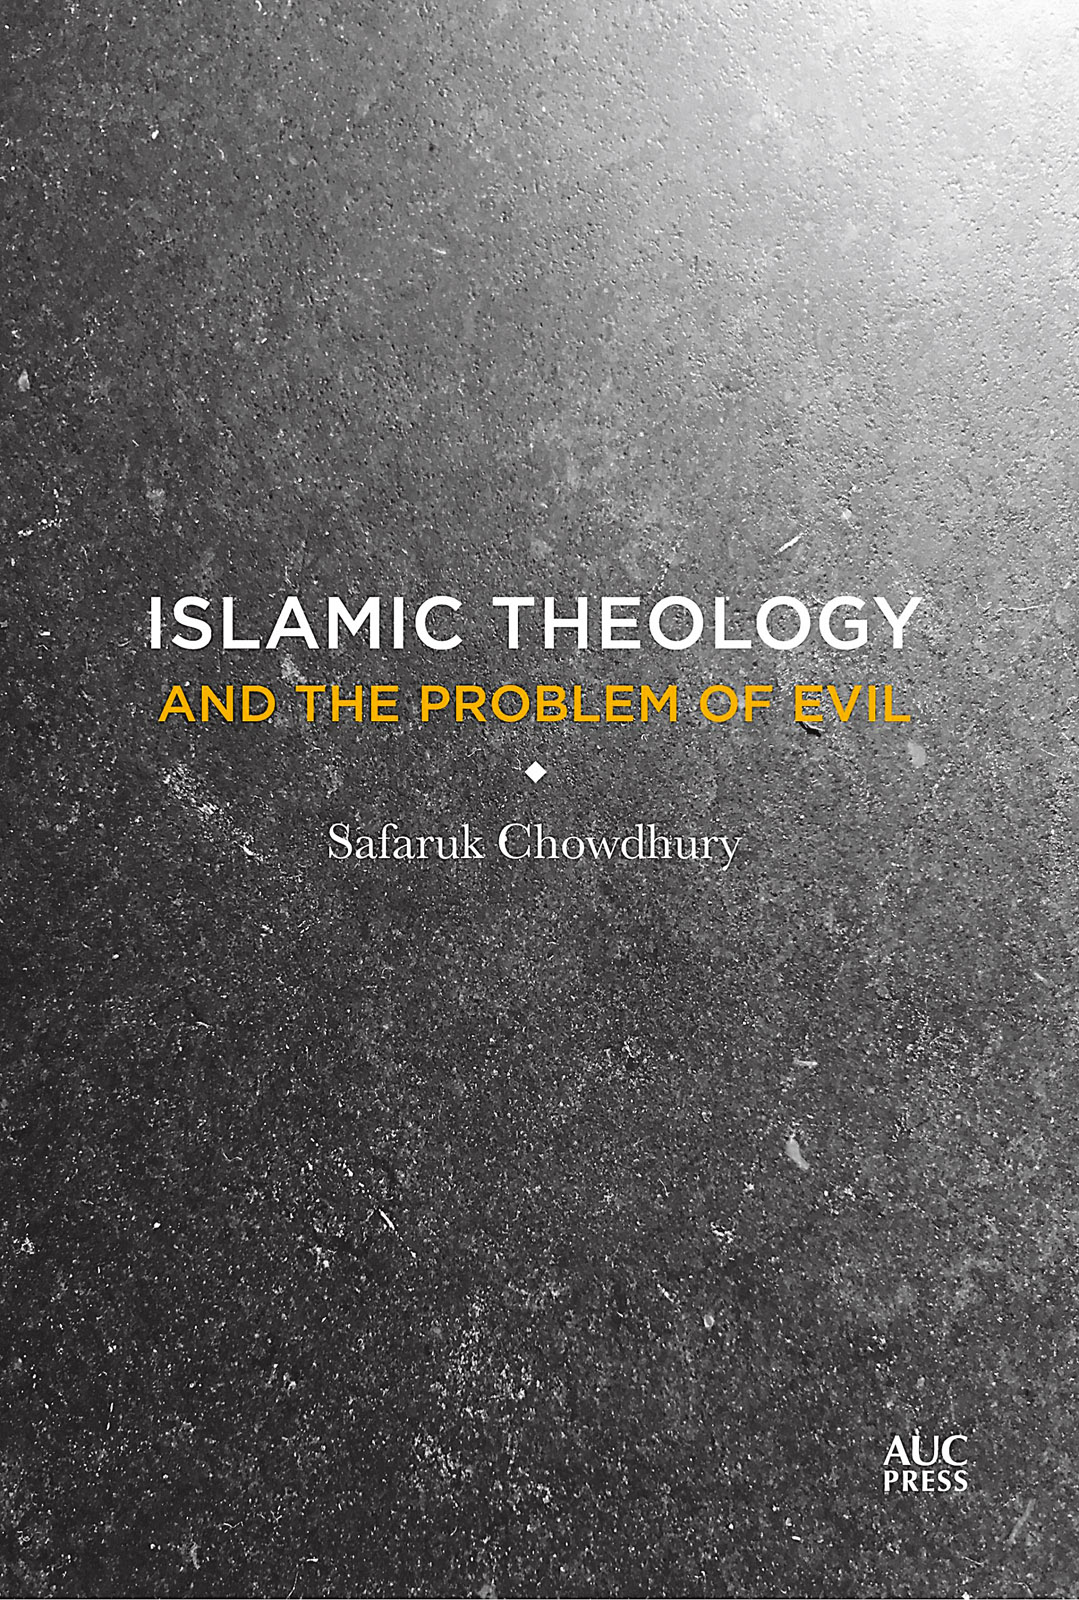 Islamic Theology and the Problem of Evil